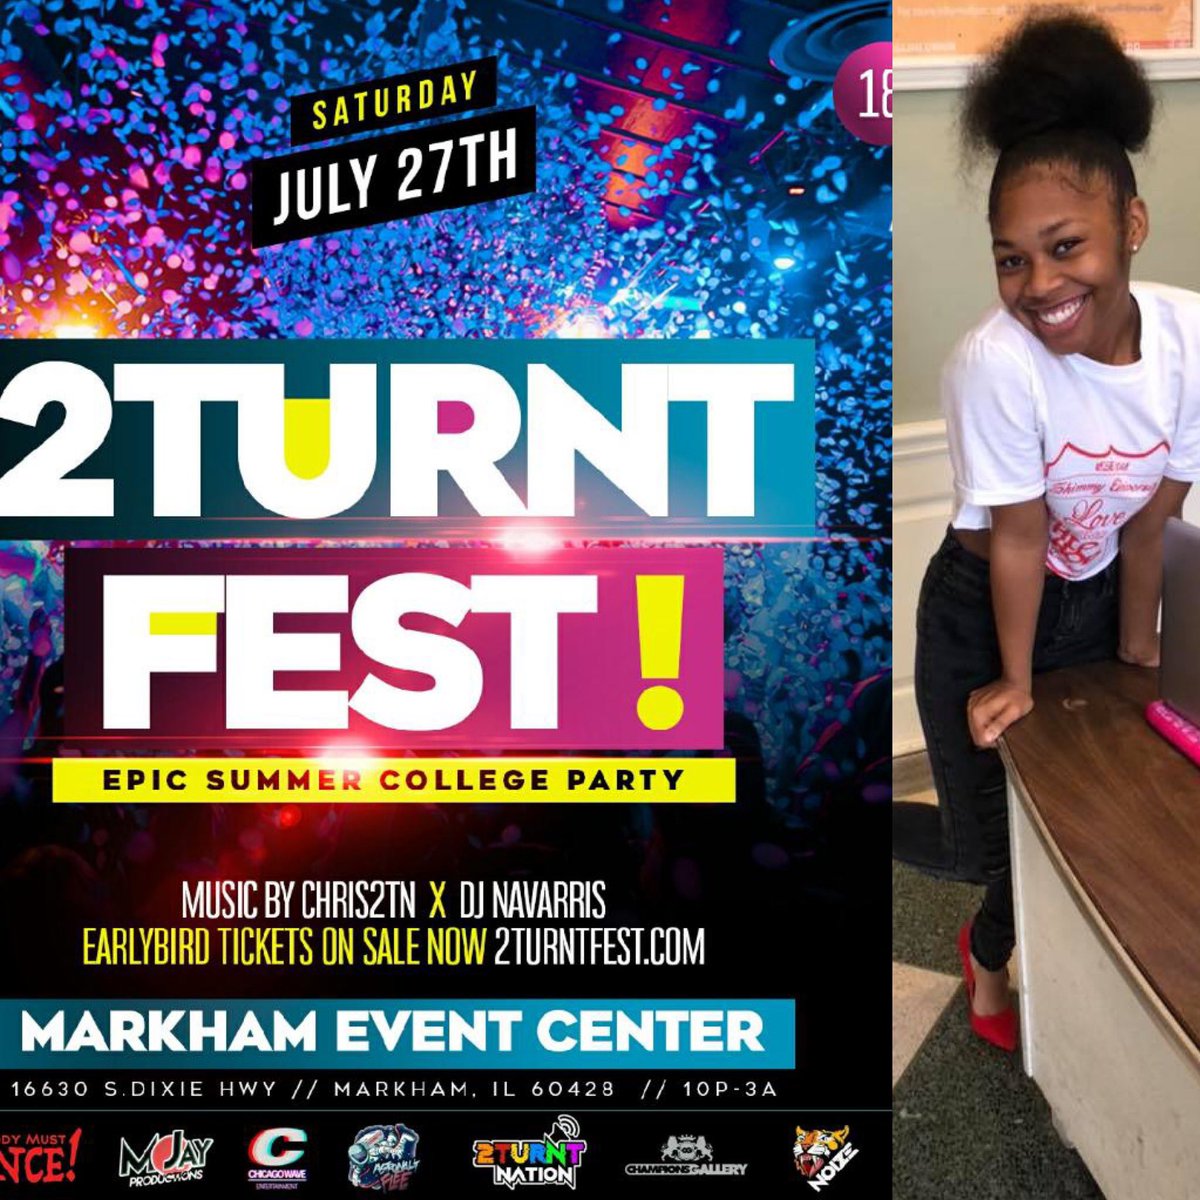 CATCH ME AT #2TurntFest 🤪😱

This is the party of the summer 🚫🧢 

Come turn up with @2TurntNation 💔✌🏽
#NIU23 #ISU23 #UIUC23
eventlink.to/2tn